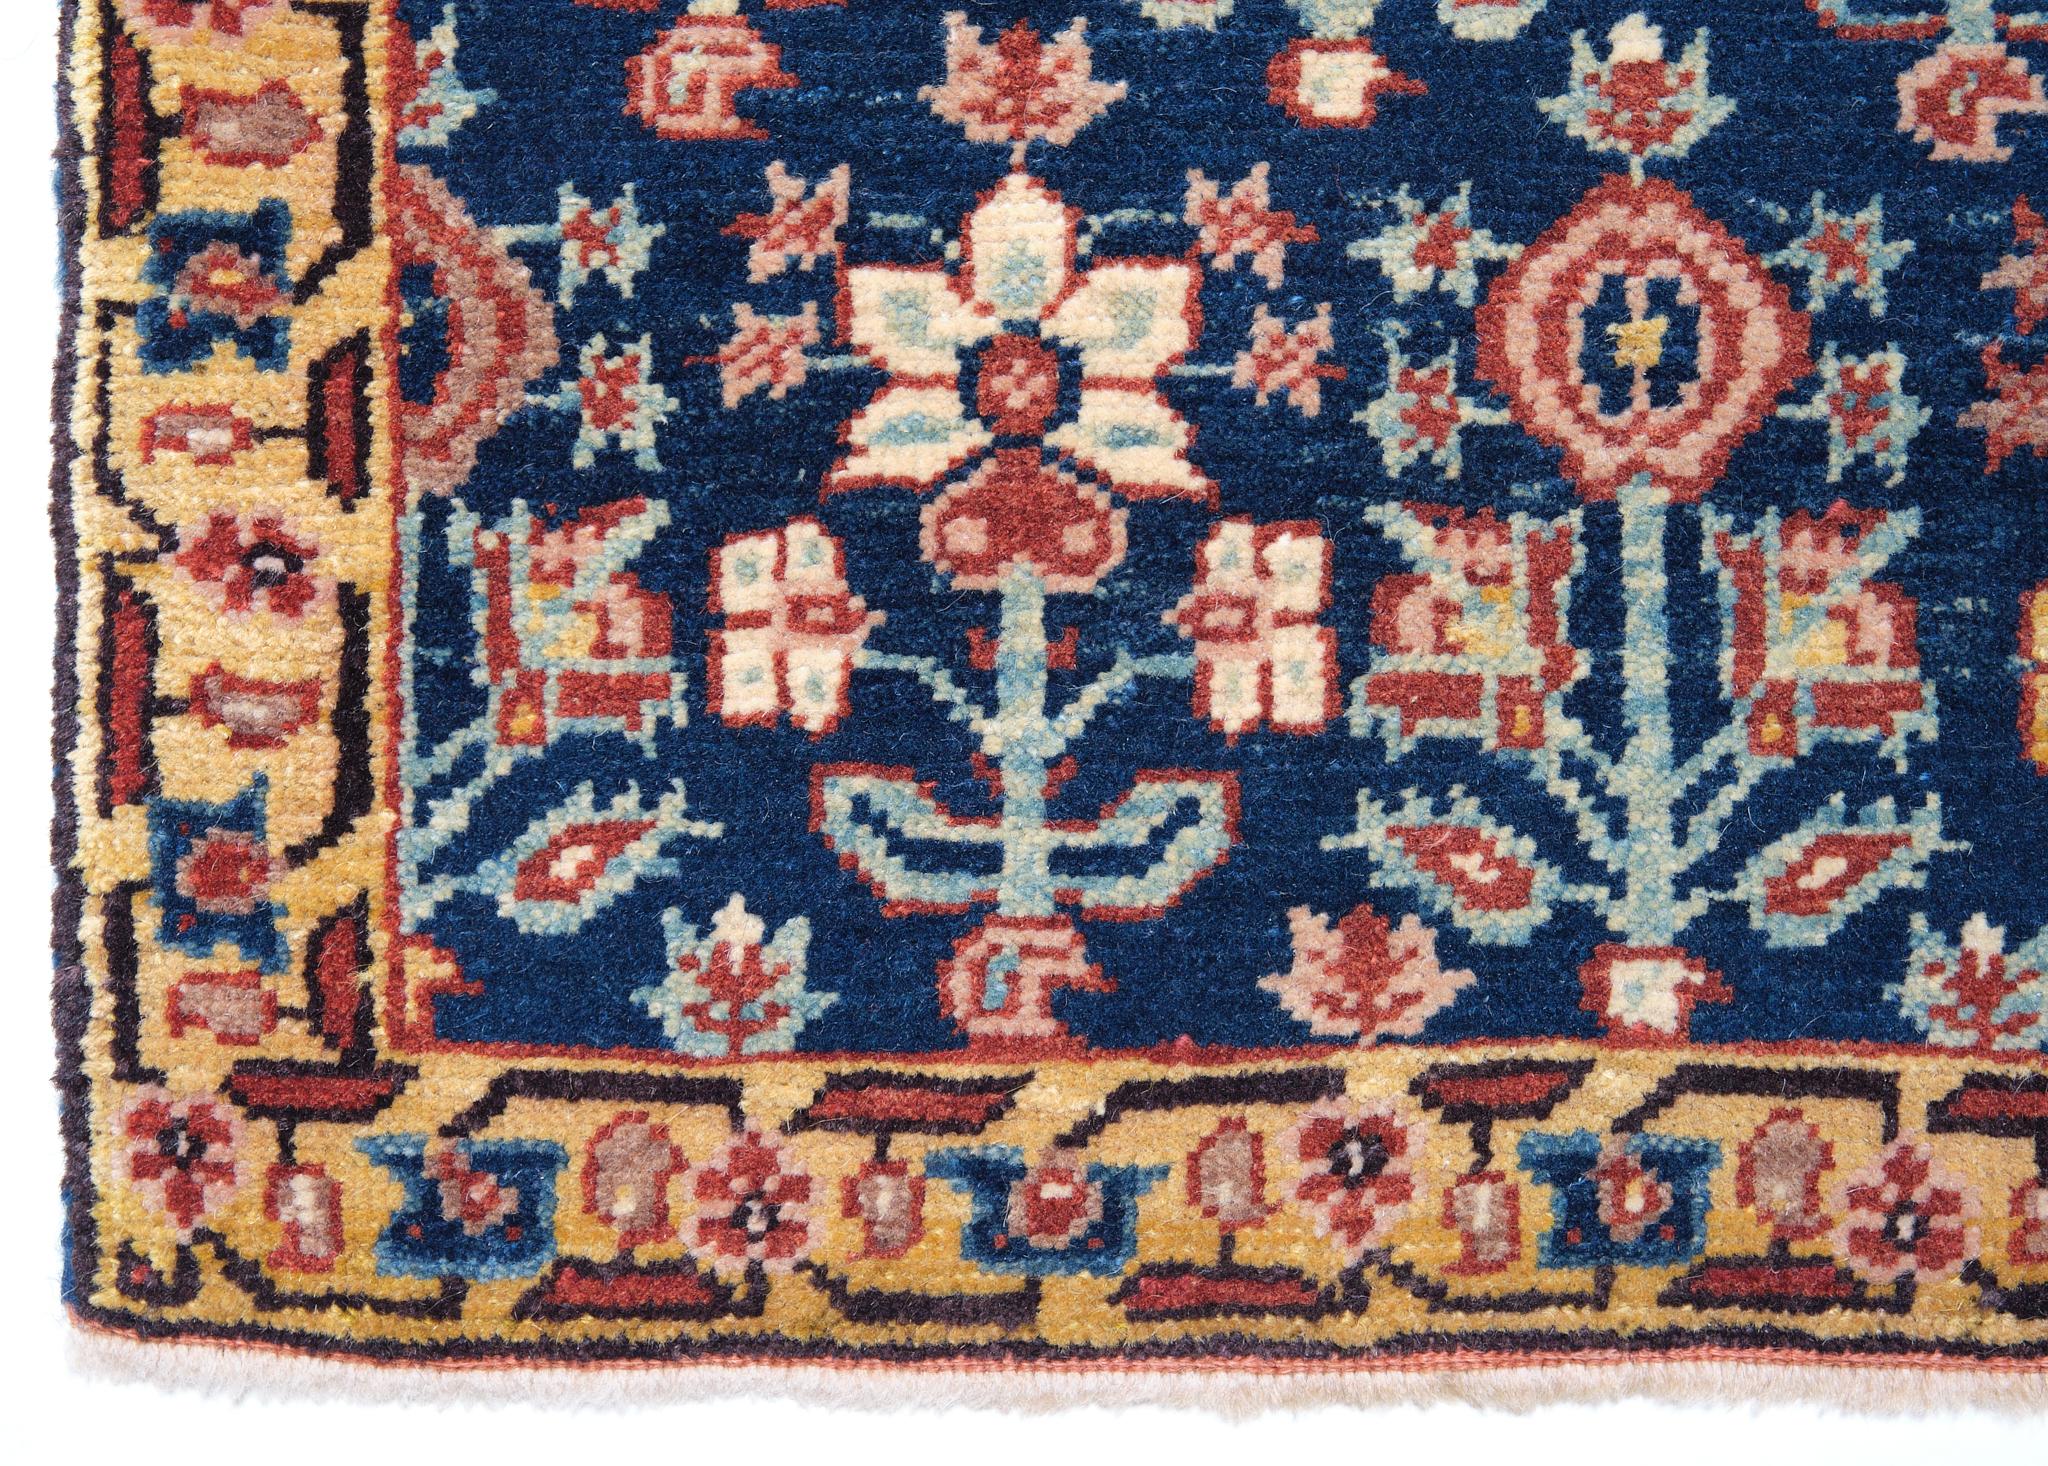 The source of the rug comes from the book Antique Rugs of Kurdistan A Historical Legacy of Woven Art, James D. Burns, 2002 nr.36 This was an exclusive example of offset rows of ascending flowers design rug c.1800s from Garrus, Eastern Kurdistan